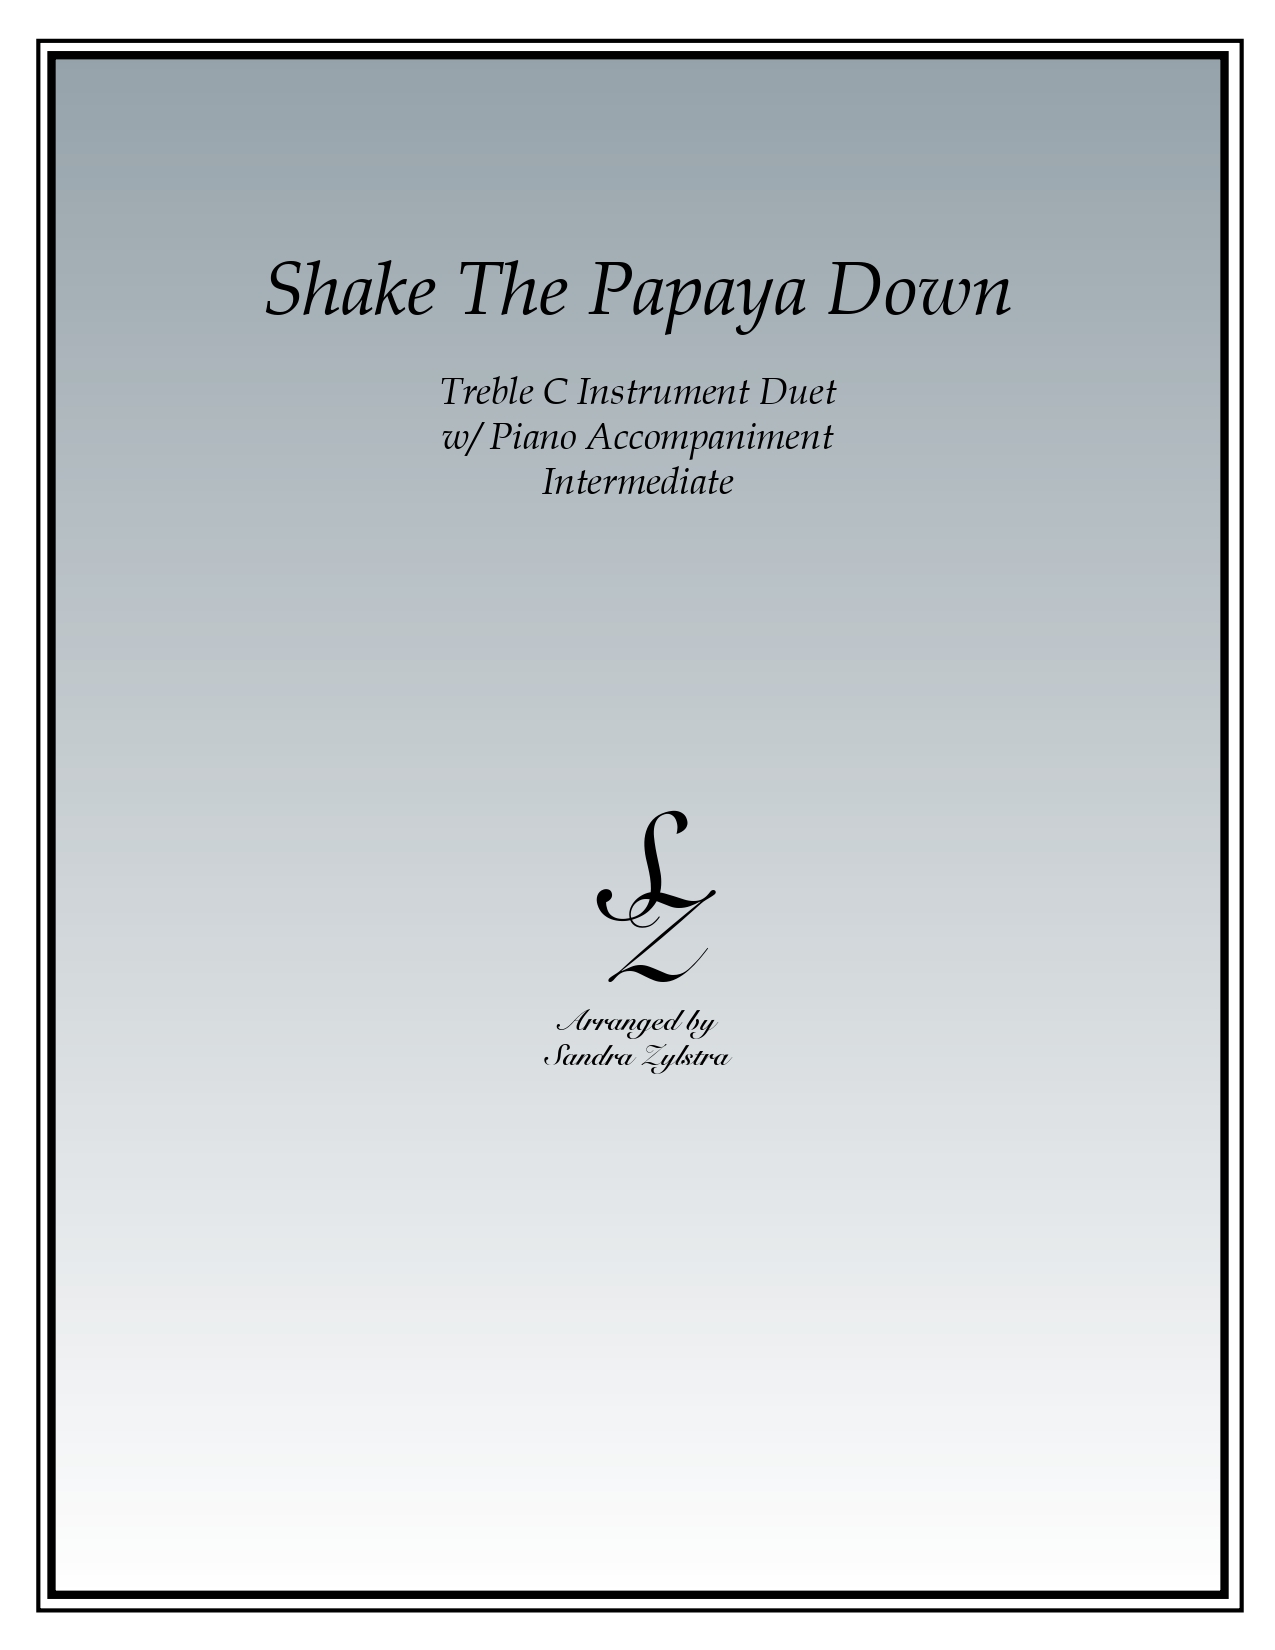 Shake The Papaya Down treble C instrument duet part cover page 00011